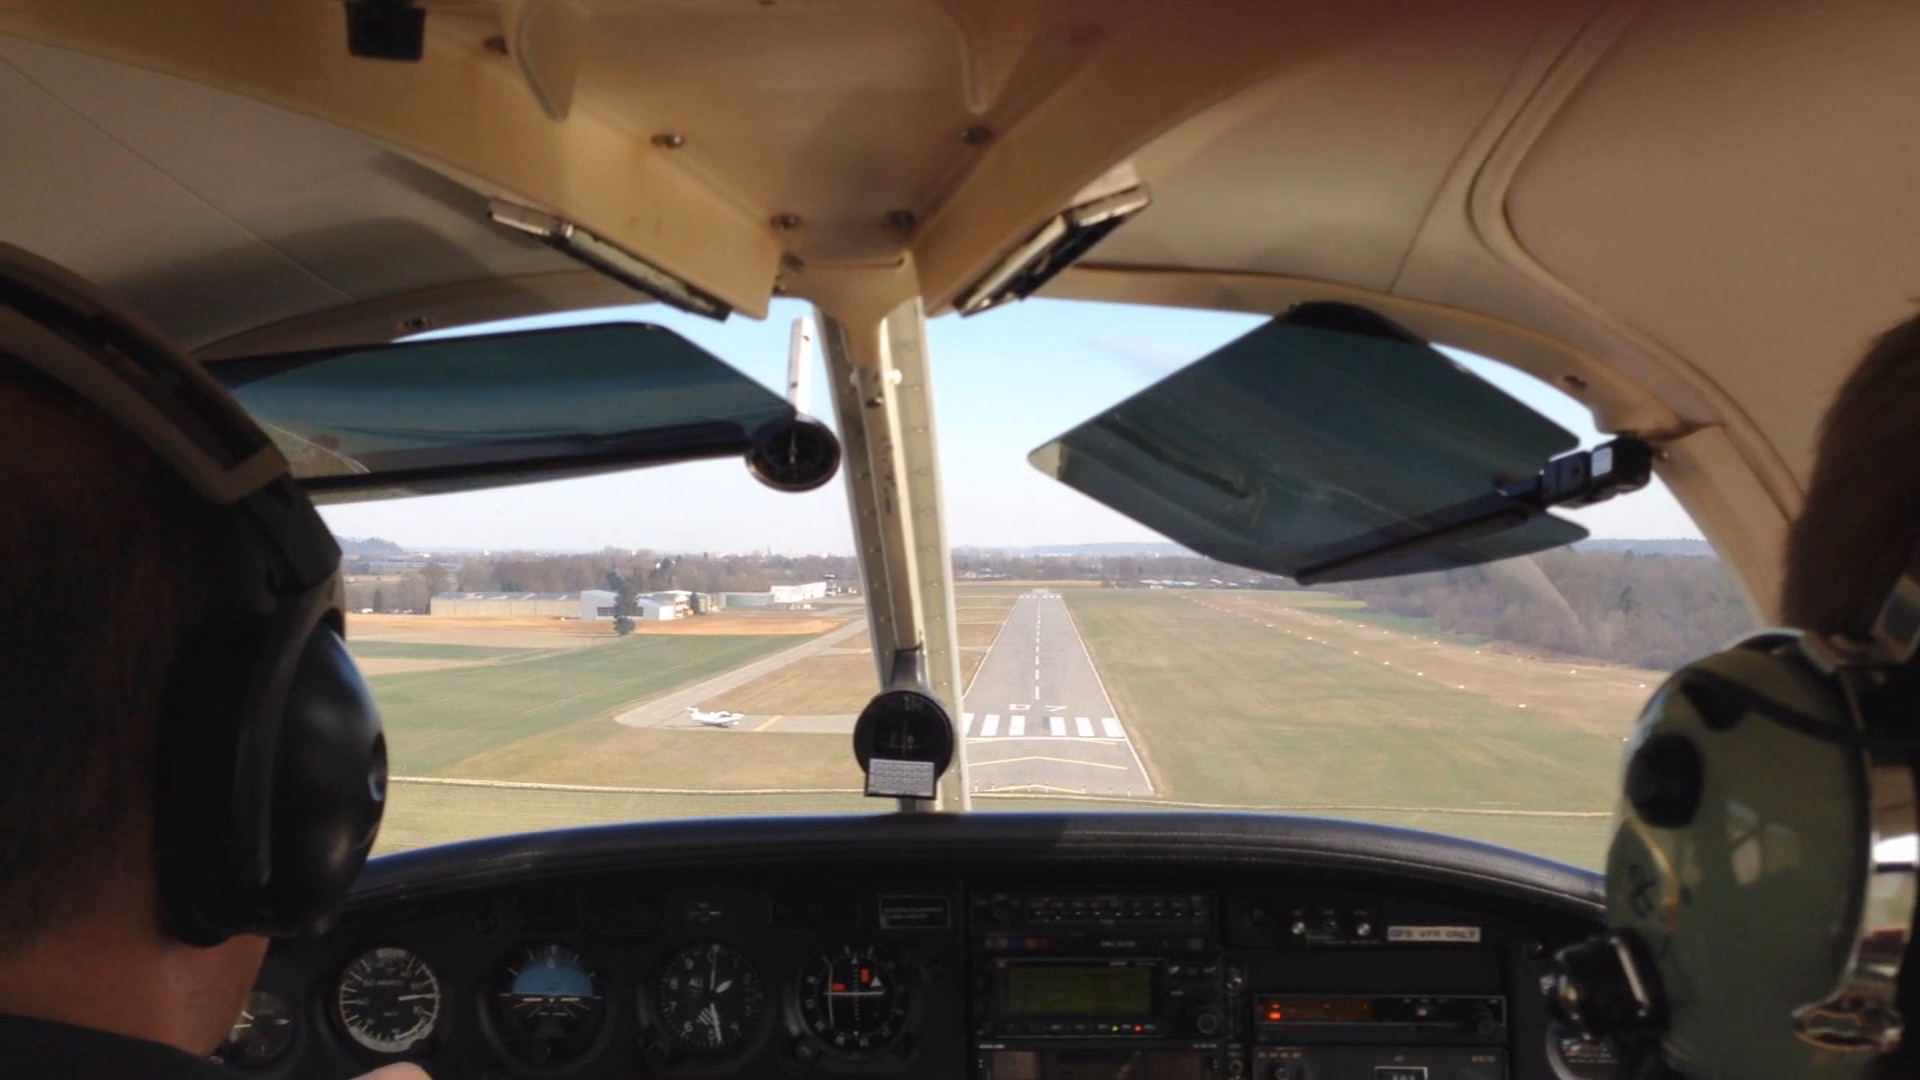 Landing approach at the end of a test flight.